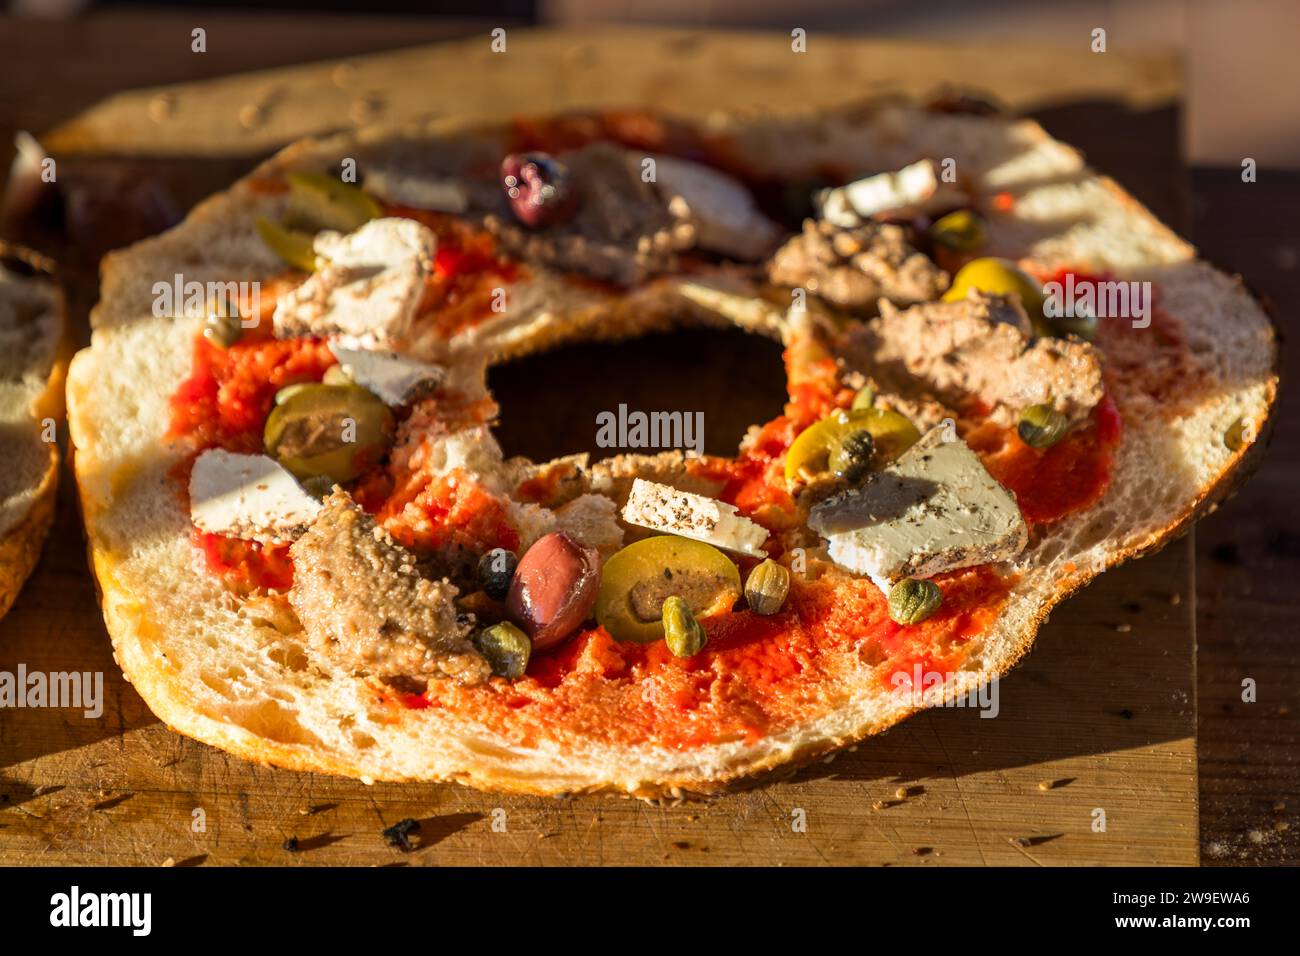 In the oven belonging to the Girgenti olive grove in Siġġiewi, visitors can prepare Maltese specialties themselves, Malta Stock Photo